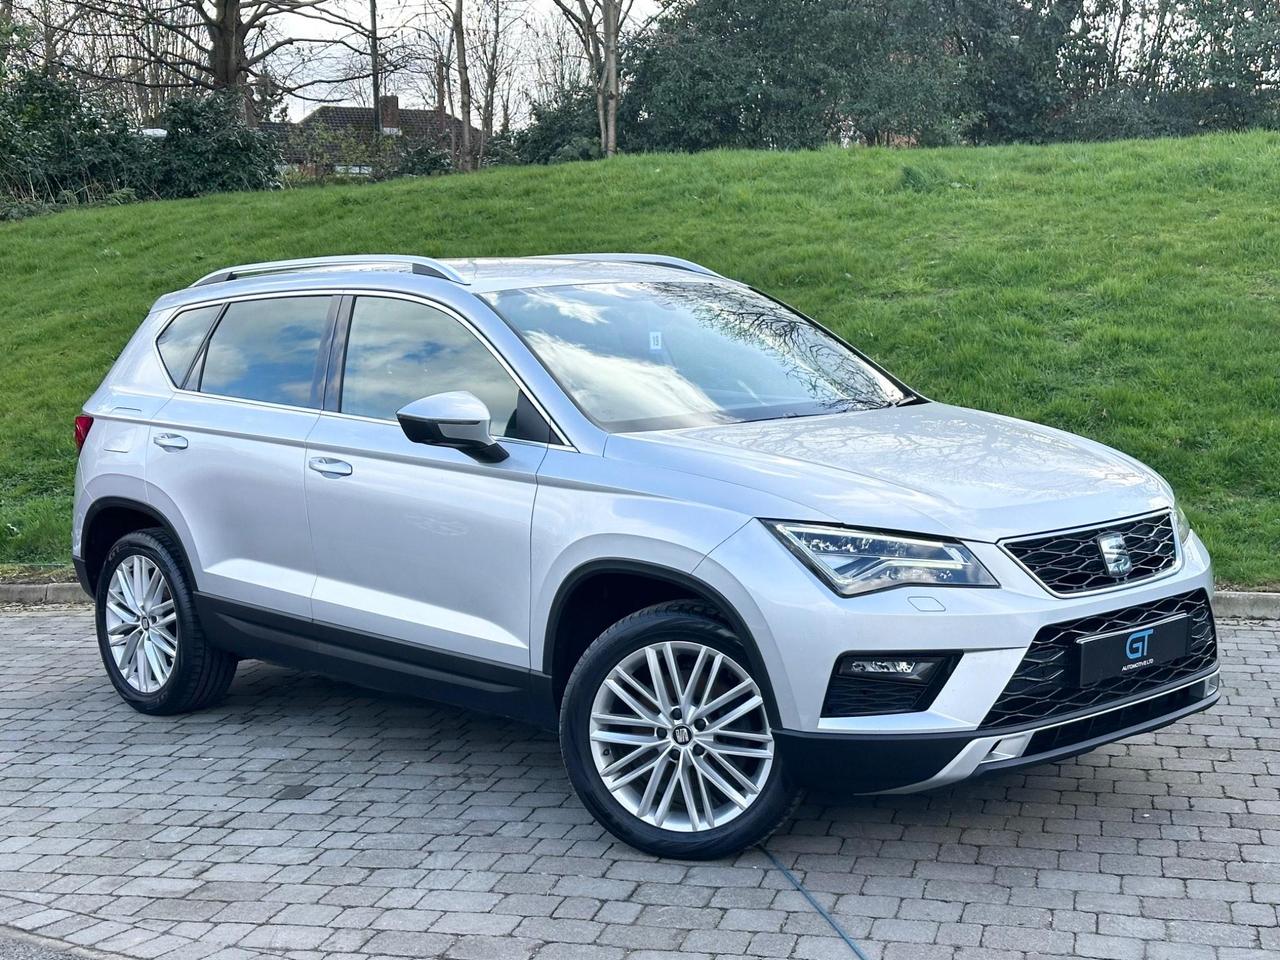 Ateca 2.0 TDI XCELLENCE SUV 5dr Diesel Manual 4Drive Euro 6 (s/s) (150 ps) Main Image